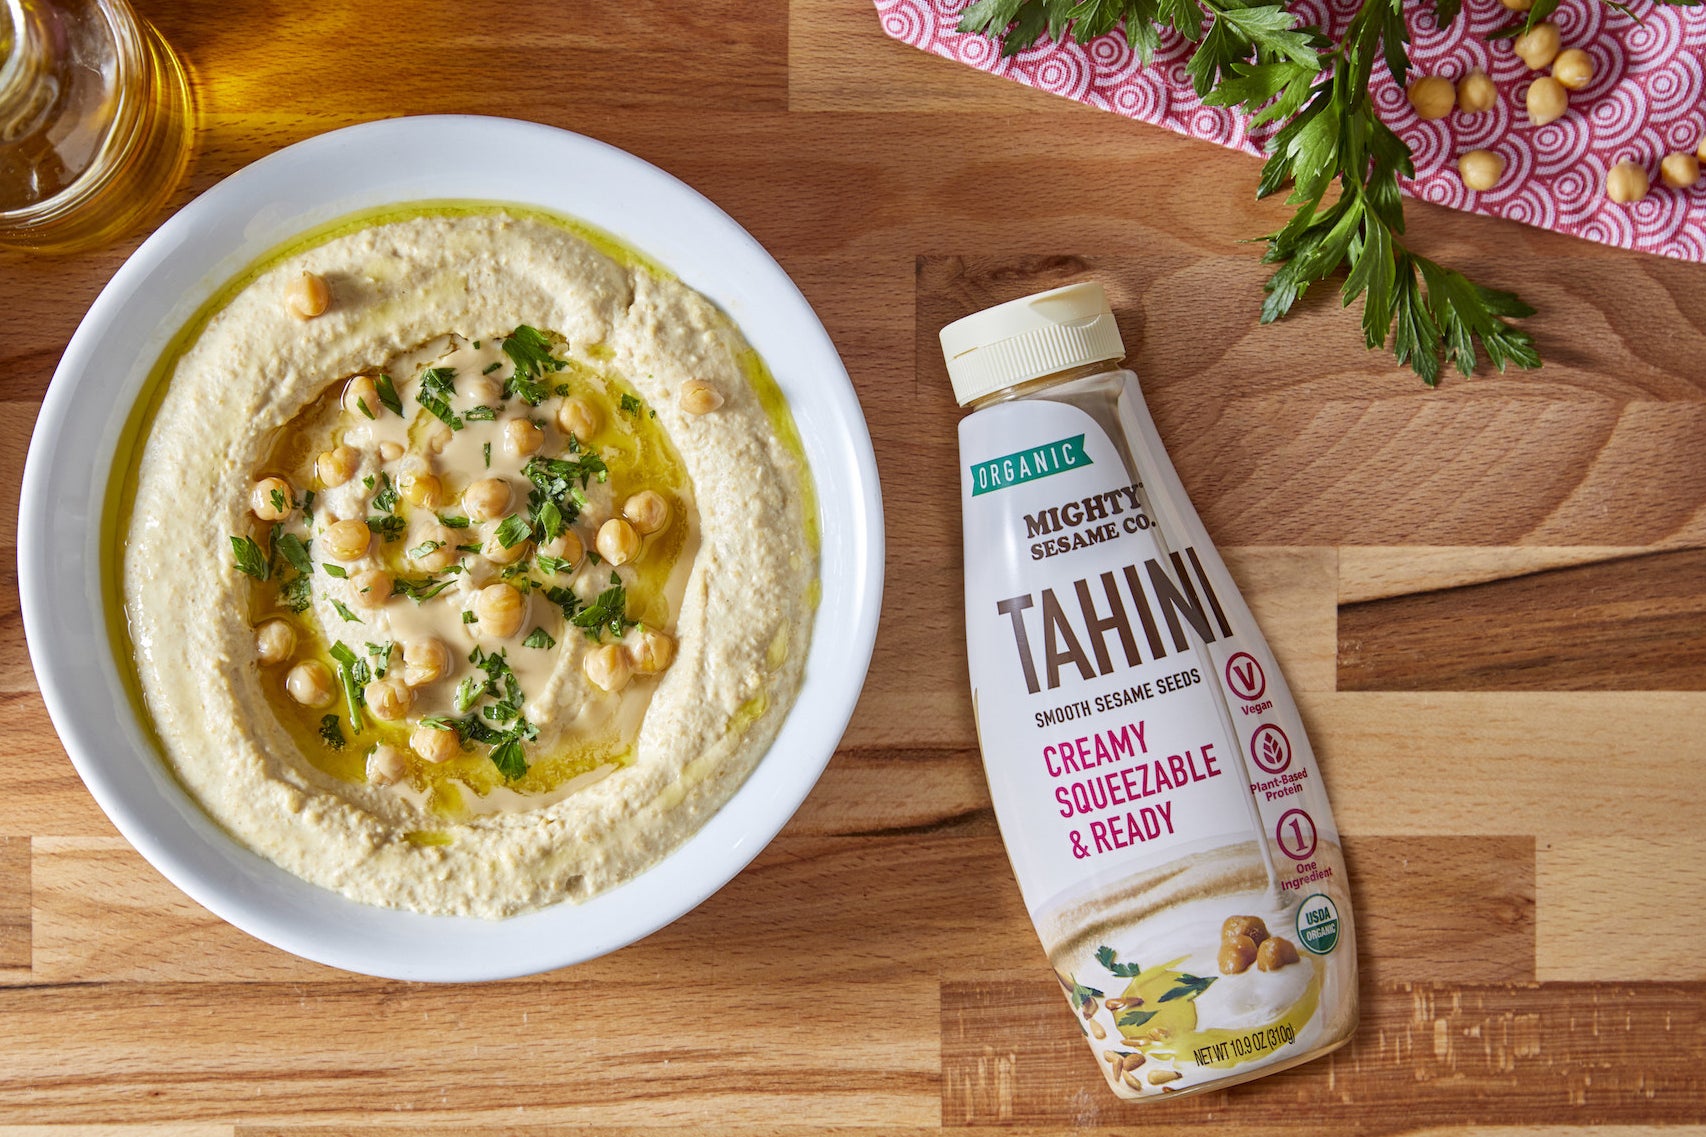 A table with hummus, chickpeas, and a bottle of tahini on it